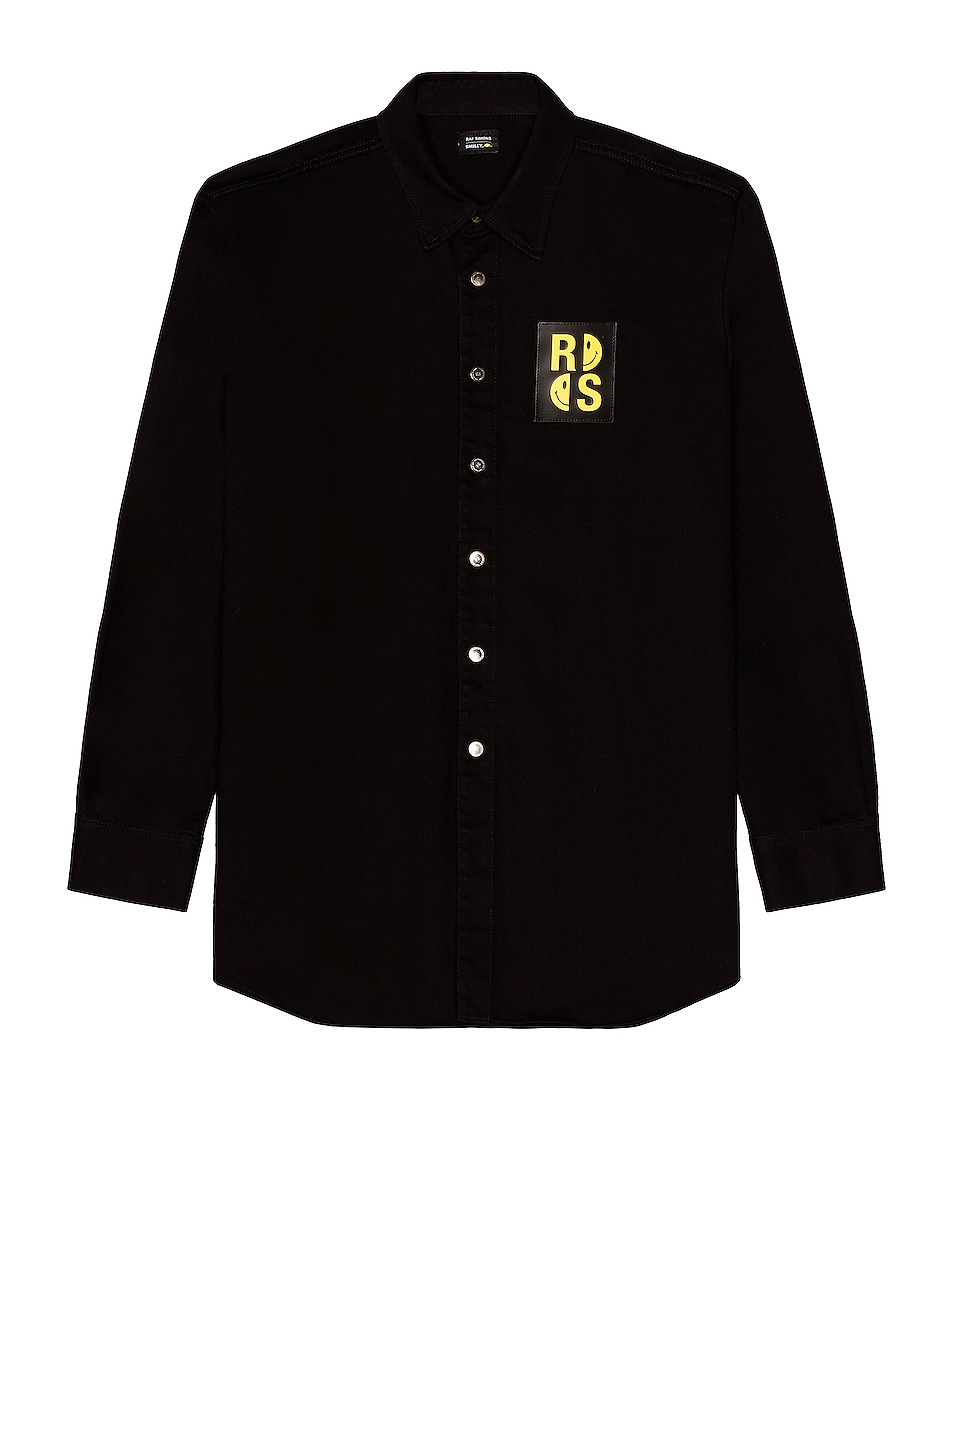 Image 1 of Raf Simons x Smiley Leather Patch Denim Shirt in Black